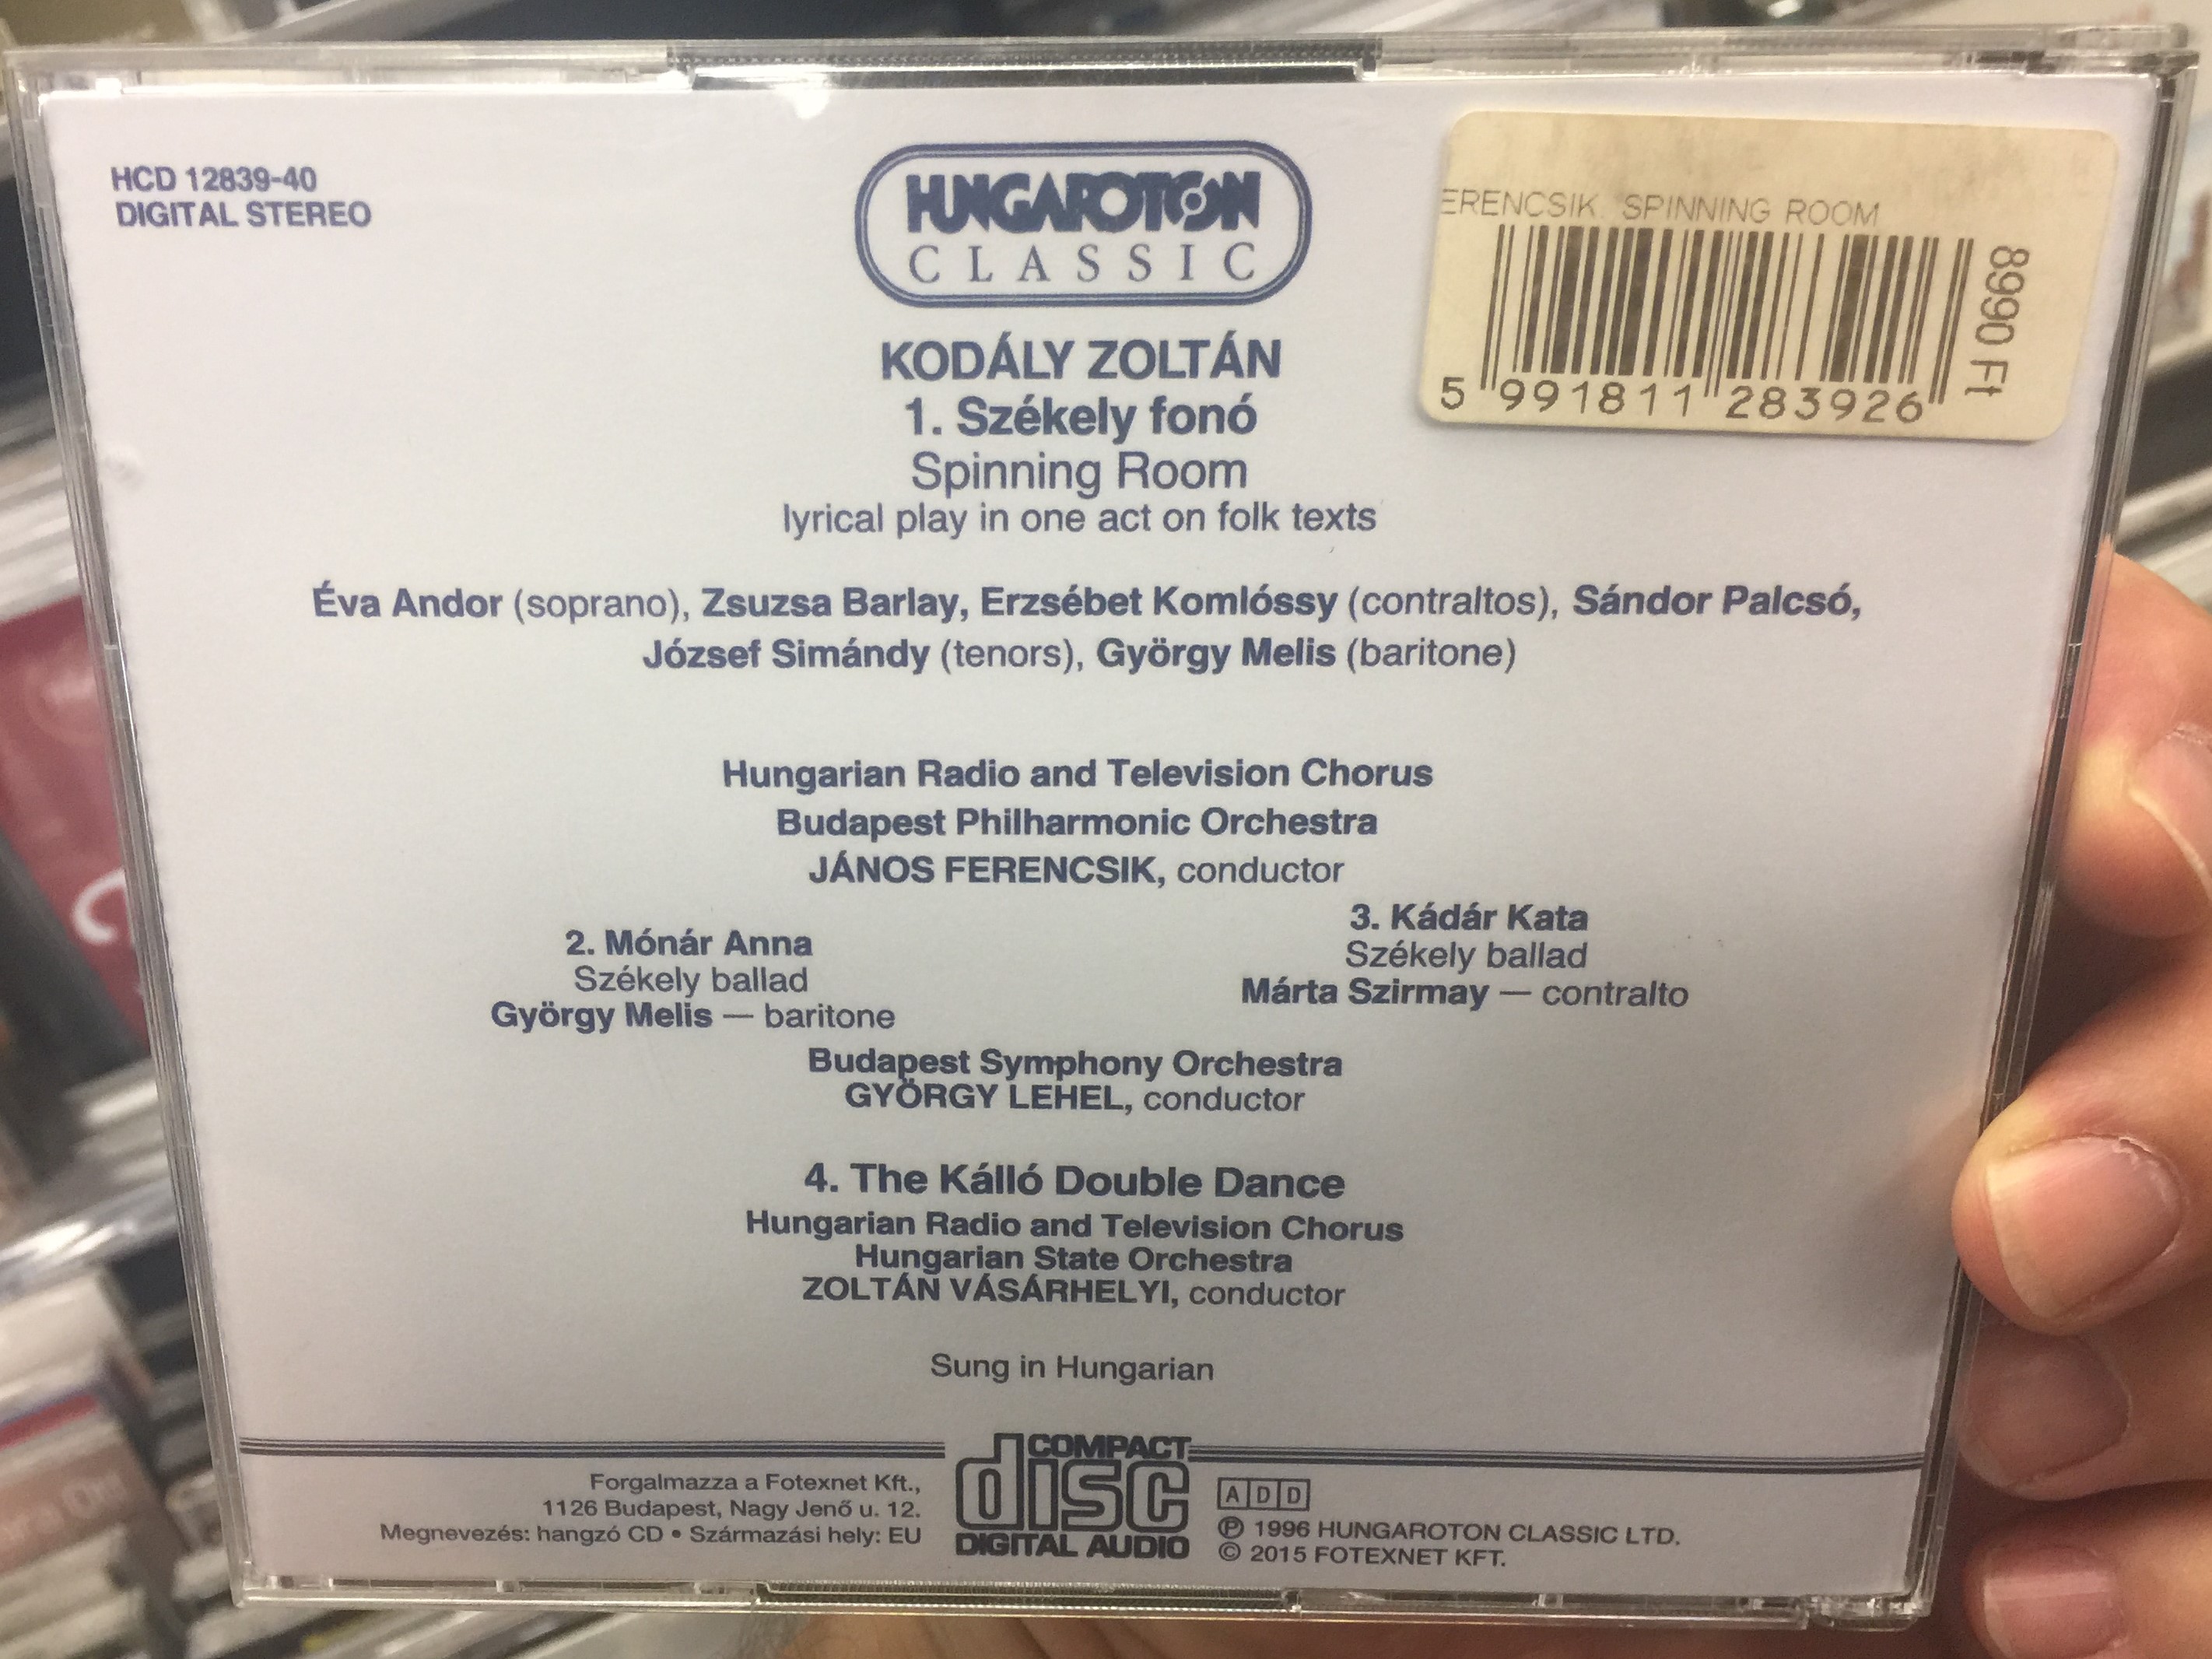 kod-ly-spinning-room-szekely-fono-orchestral-songs-the-kallo-double-dance-conducted-by-j-nos-ferencsik-gy-rgy-lehel-zolt-n-v-s-rhelyi-hungaroton-classic-2x-audio-cd-1996-stereo-hcd-12.jpg